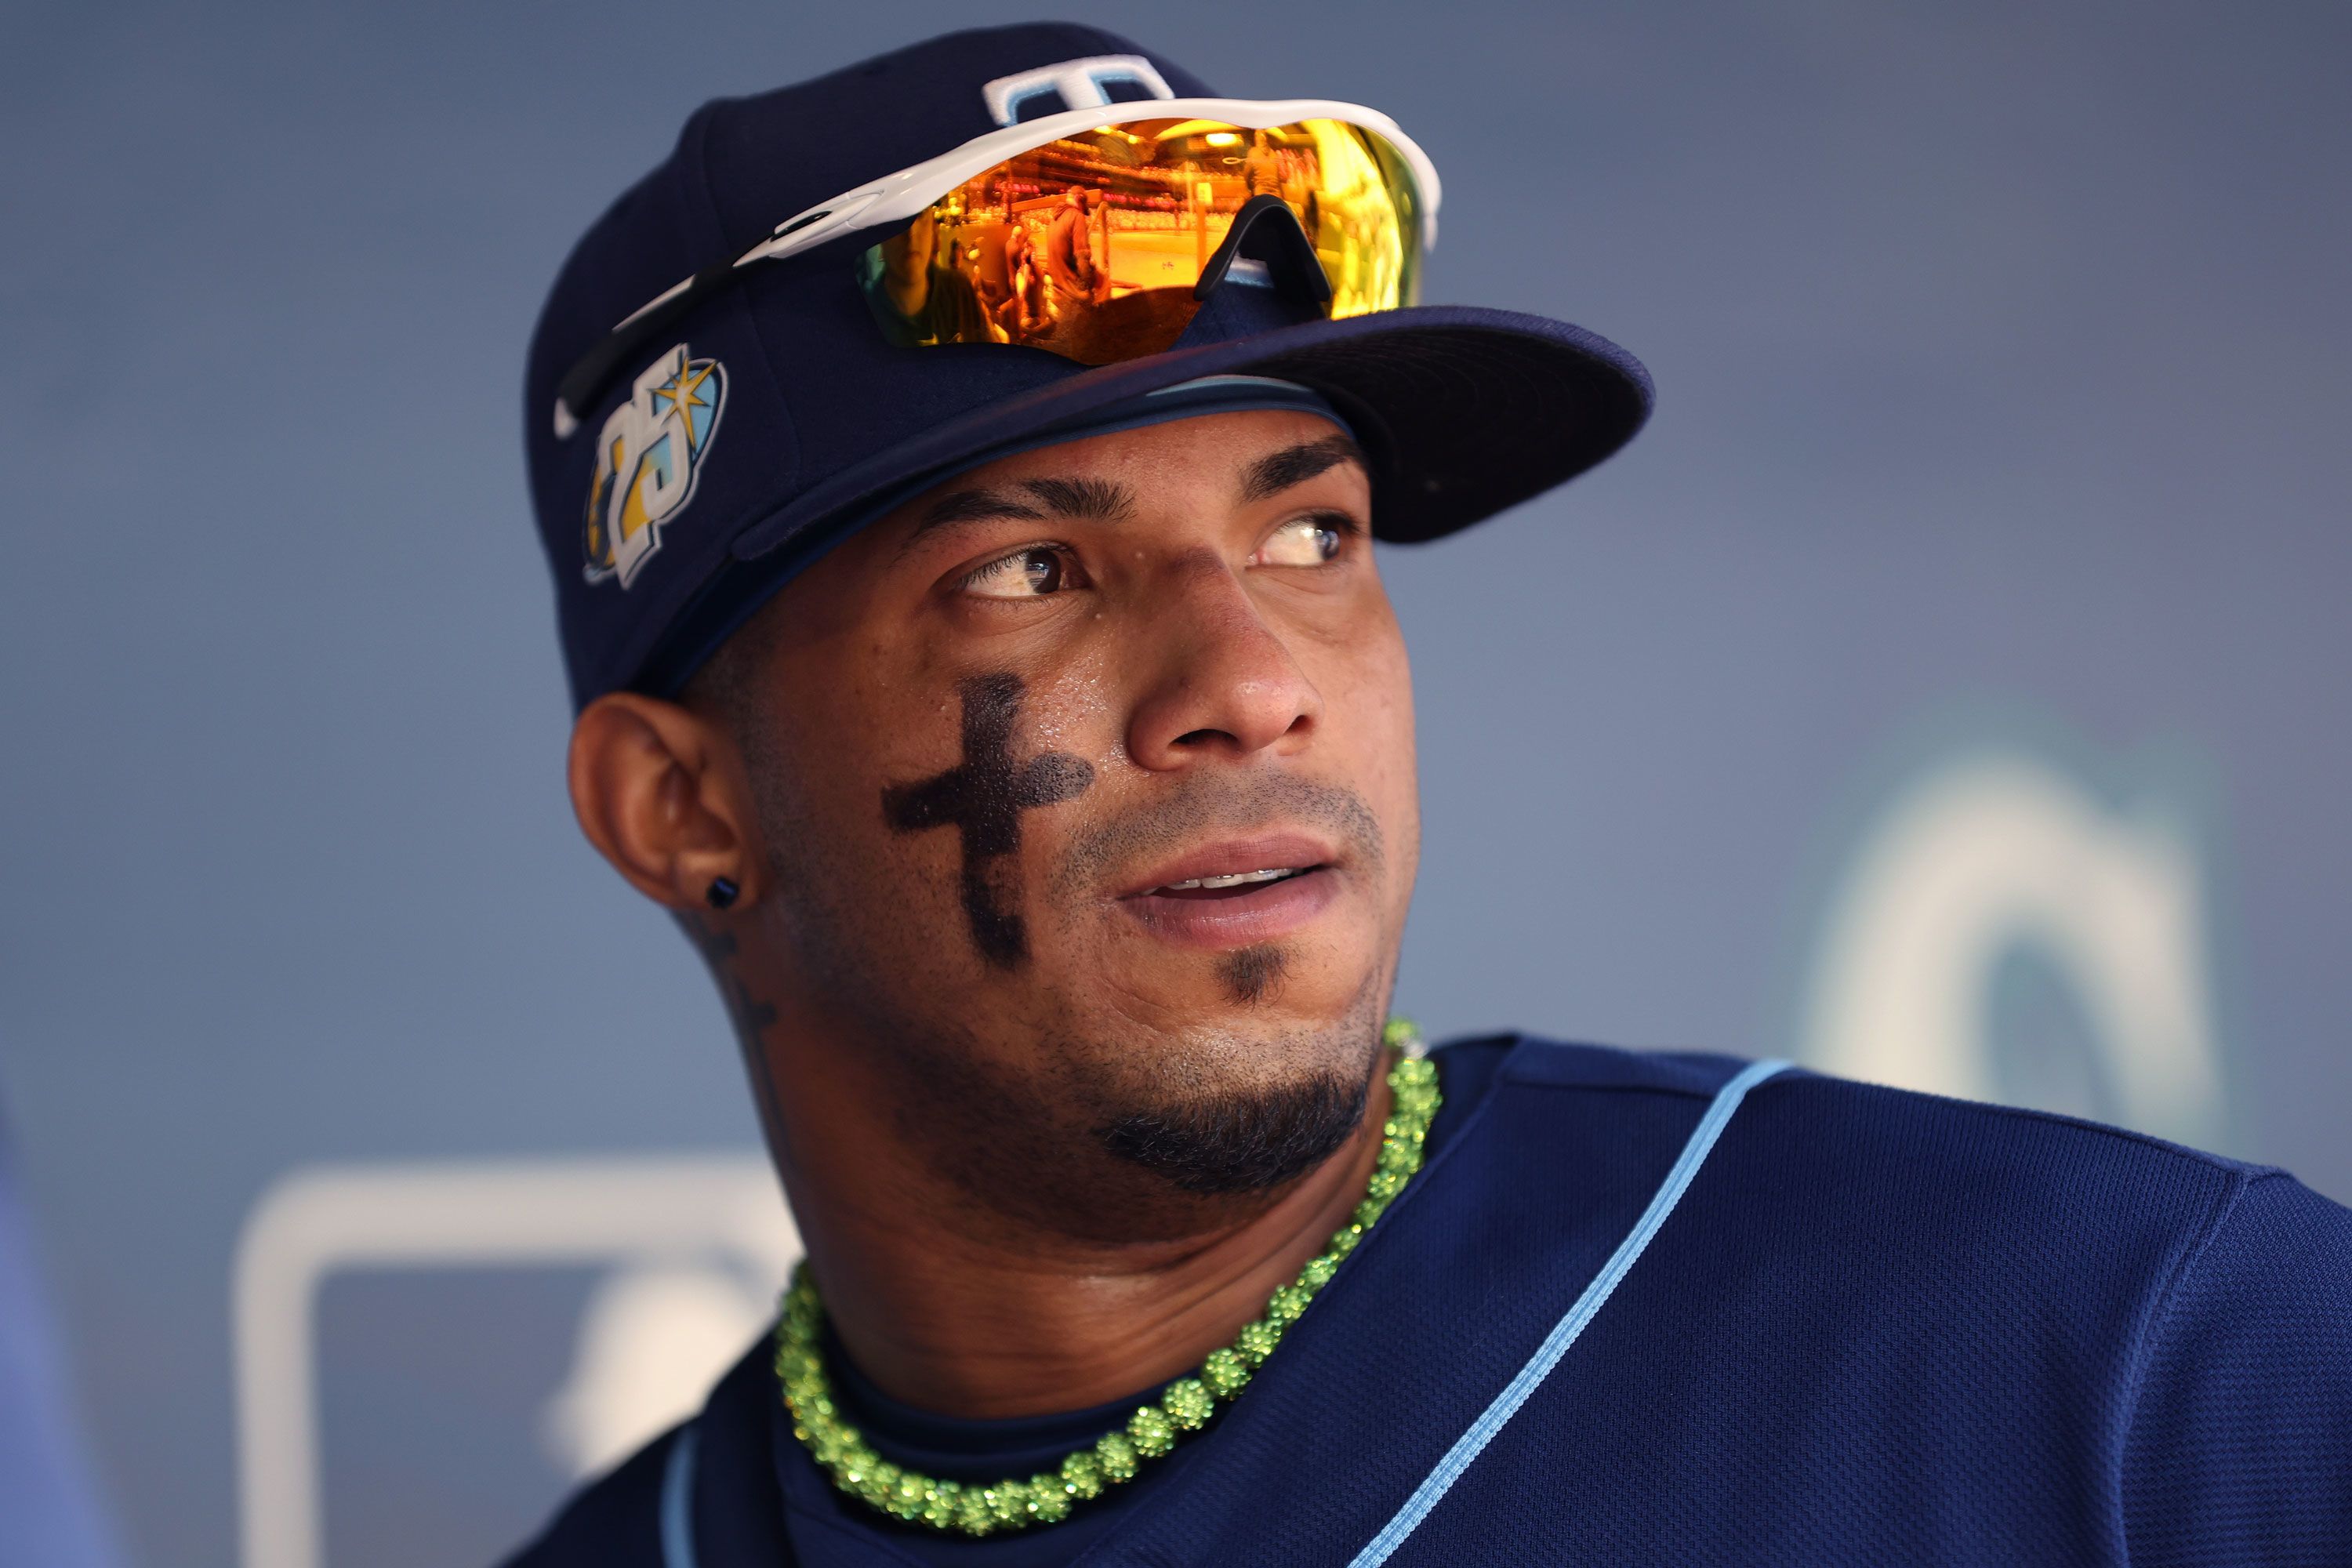 Say What Now? Tampa Bay Rays Shortstop Wander Franco Accused of